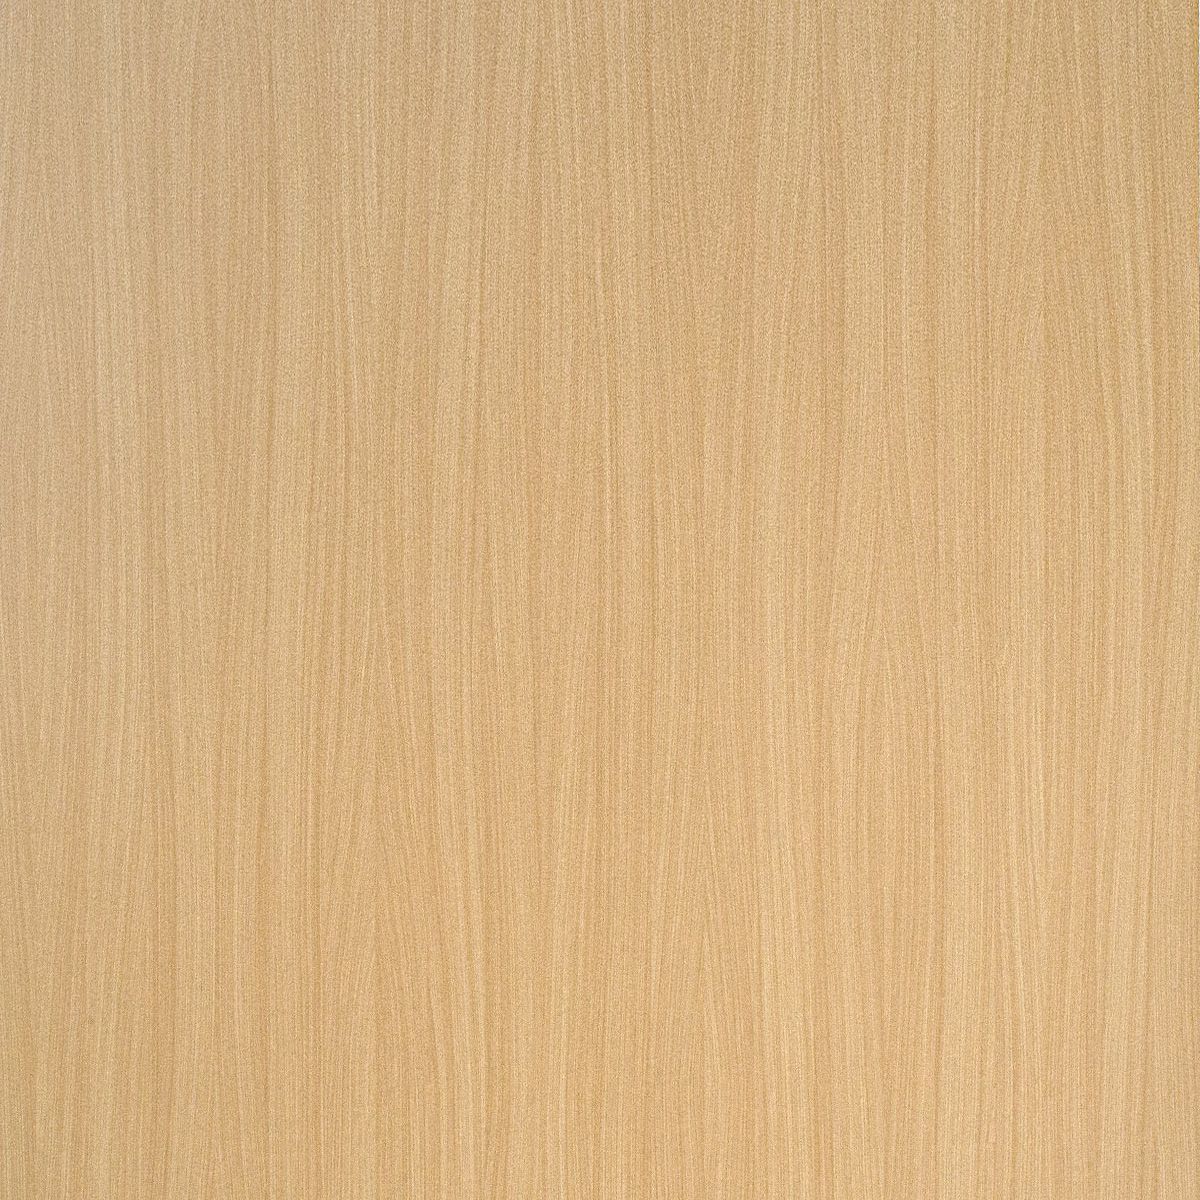 3032 Fawned Rosewood (SUD)Laminate Sheets in India